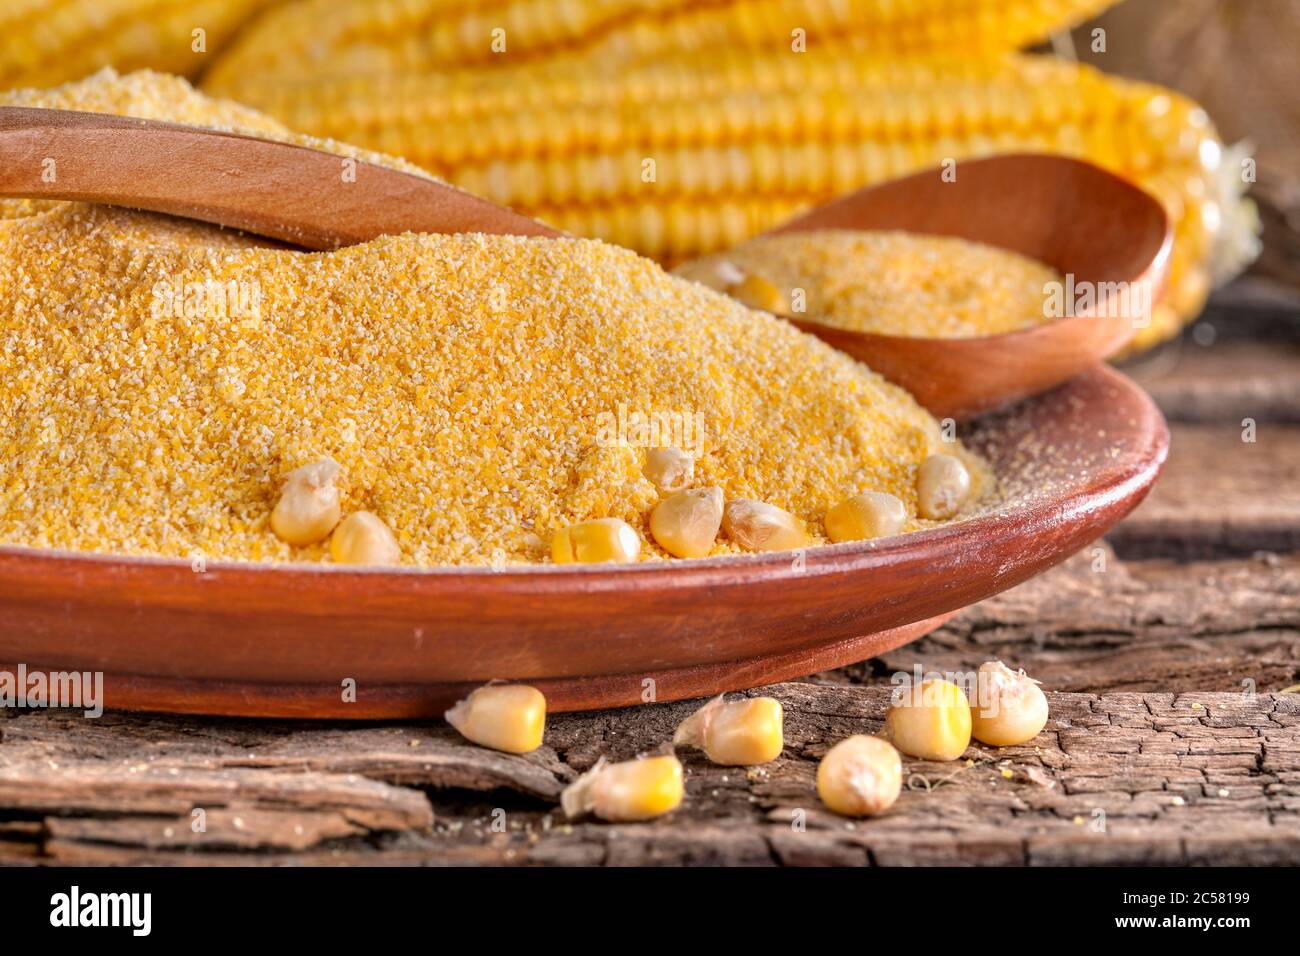 Corn grits polenta in a wooden bowl on an old wooden table. Detox and an antioxidant diet. The concept of healthy eating and lifestyle. Stock Photo